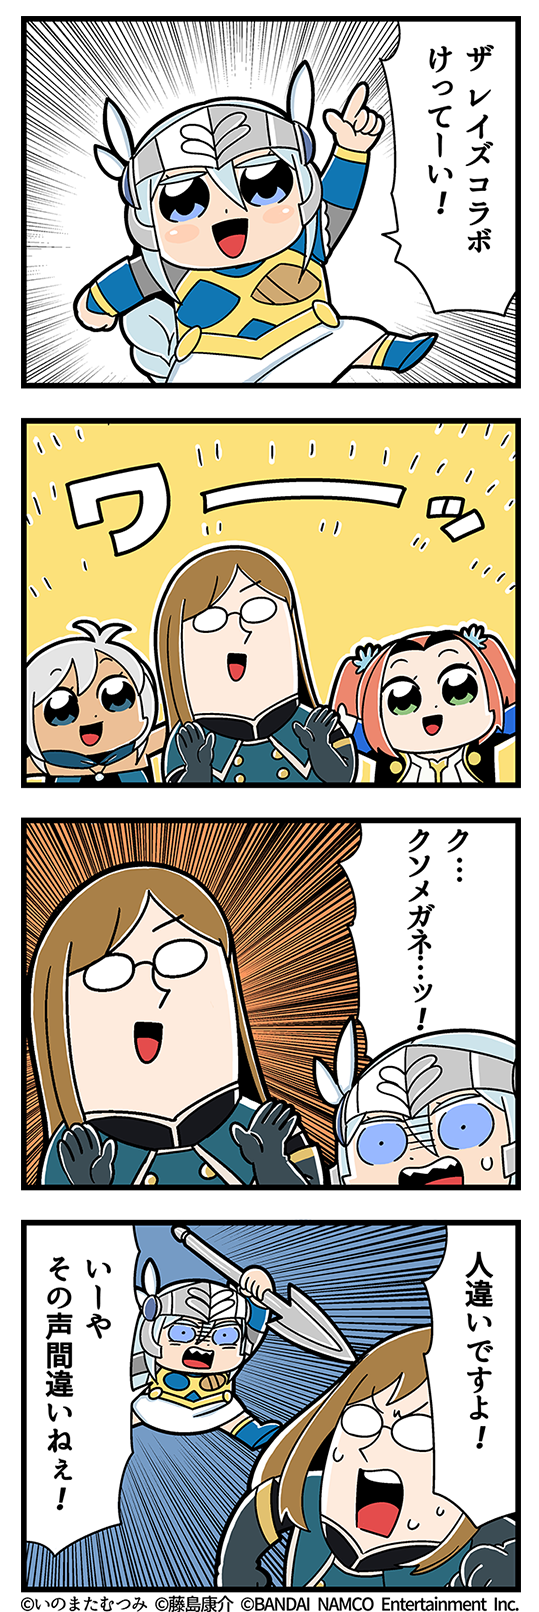 4girls 4koma :d arm_up armor bangs bkub blue_armor blue_eyes blush_stickers brown_hair chasing comic constricted_pupils dark_skin emphasis_lines eyebrows_visible_through_hair fleeing glasses gloves green_eyes grey_hair hair_between_eyes hair_ornament hair_scrunchie helmet highres holding holding_spear holding_weapon index_finger_raised lenneth_valkyrie long_hair multiple_girls opaque_glasses open_mouth orange_hair polearm scrunchie shaded_face short_hair short_twintails shouting simple_background skirt smile spear speech_bubble sweatdrop swept_bangs talking translation_request twintails valkyrie_profile valkyrie_profile_anatomia weapon winged_helmet